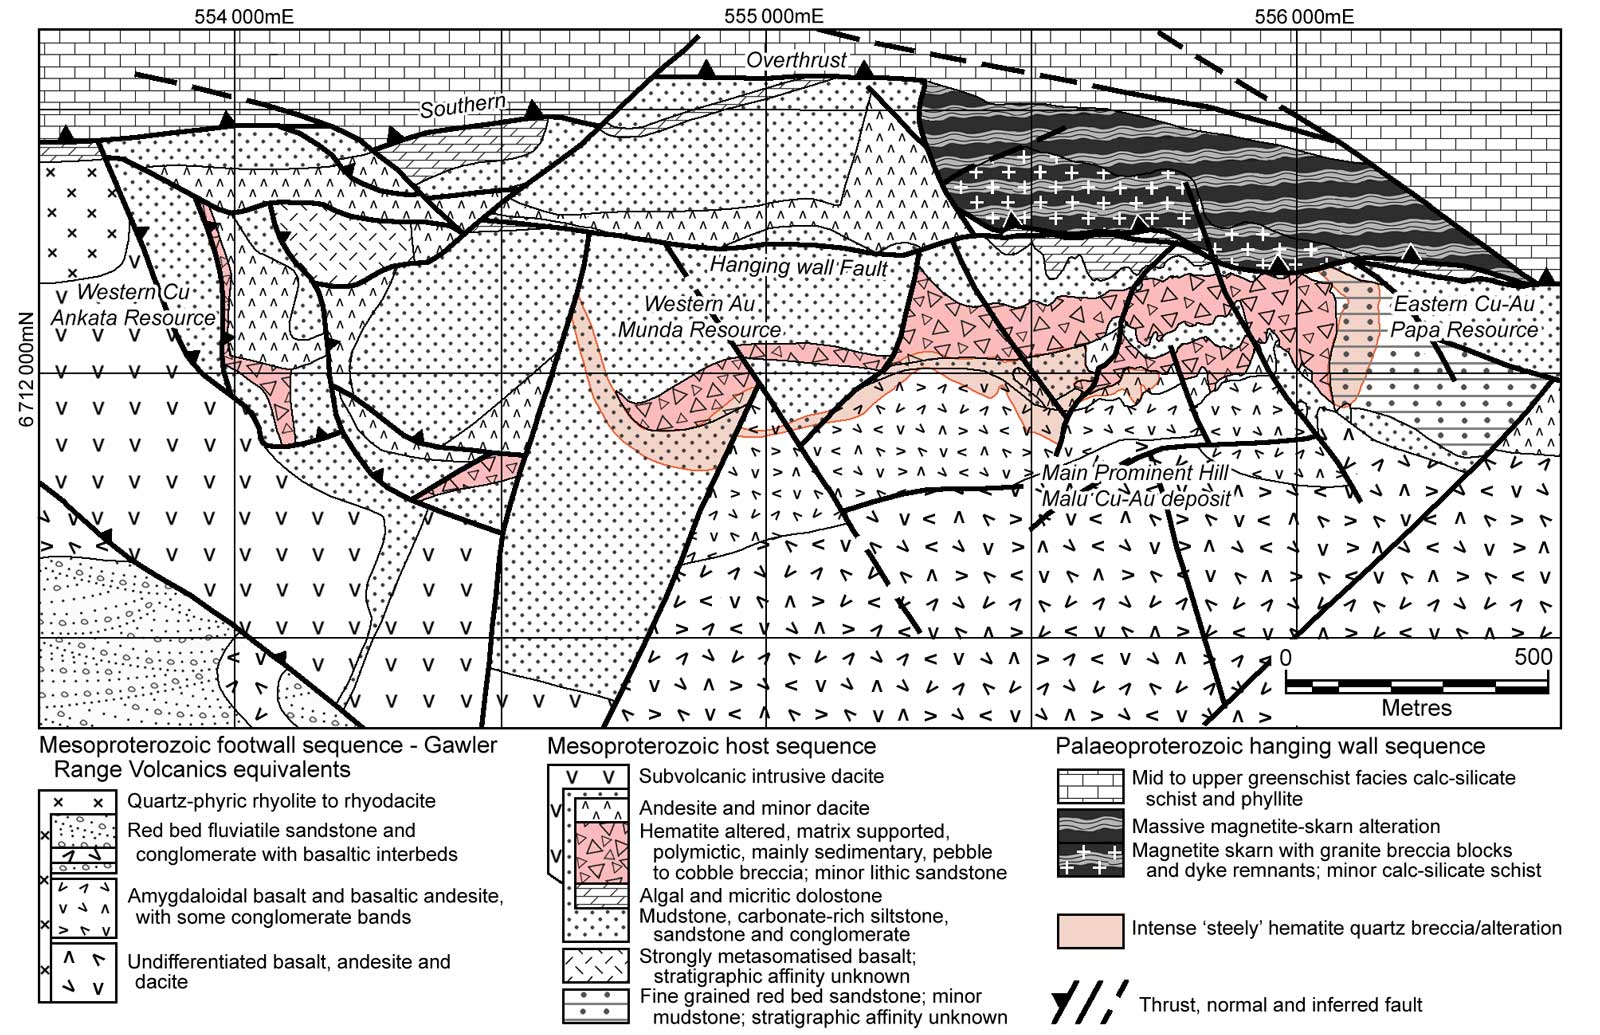 Prominent Hill Geology